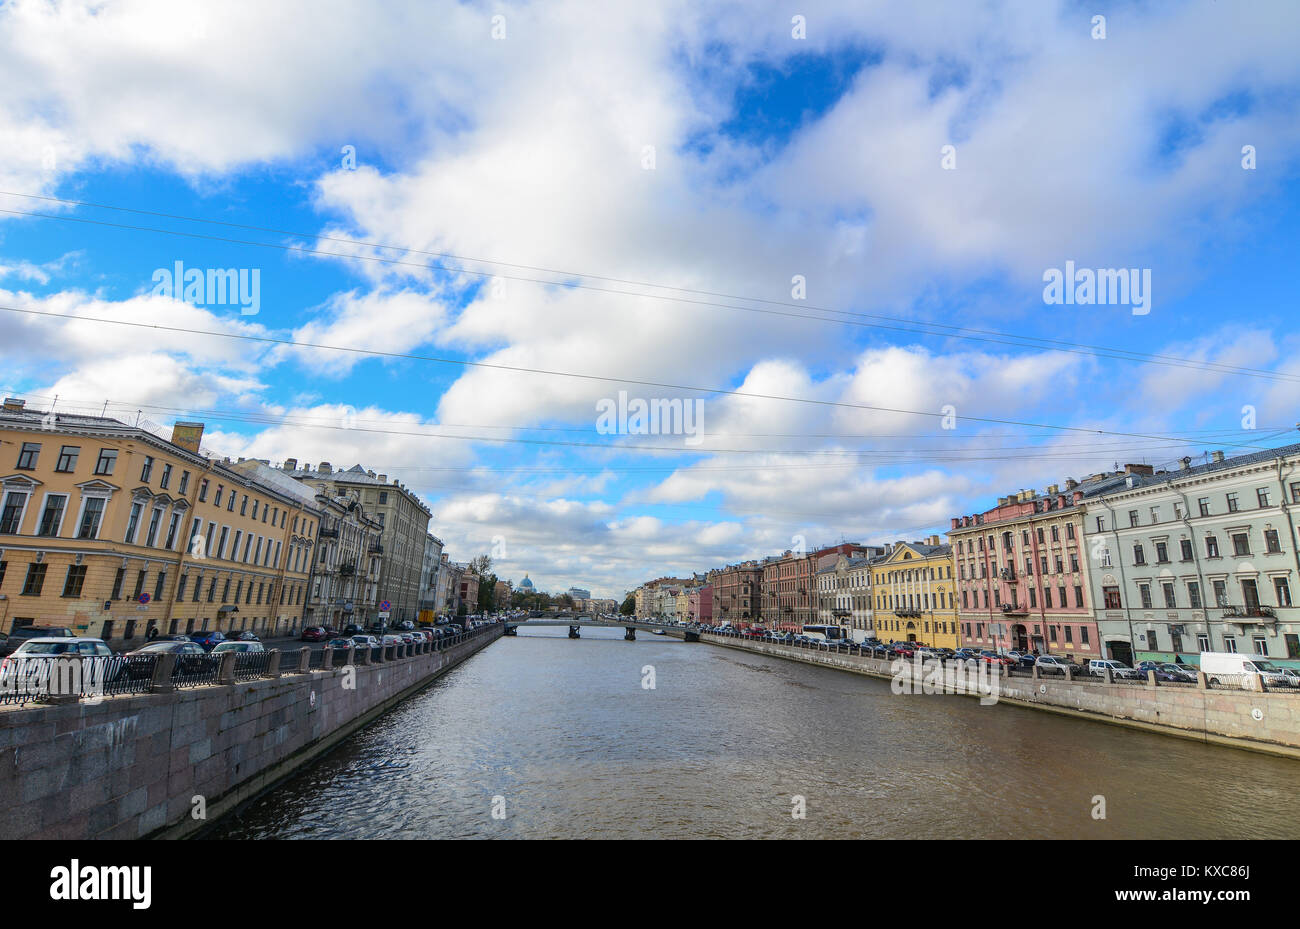 St Petersburg, Russia - Oct 7, 2016. Old buildings with Kryukov Canal in Saint Petersburg, Russia. Saint Petersburg has a significant historical and c Stock Photo